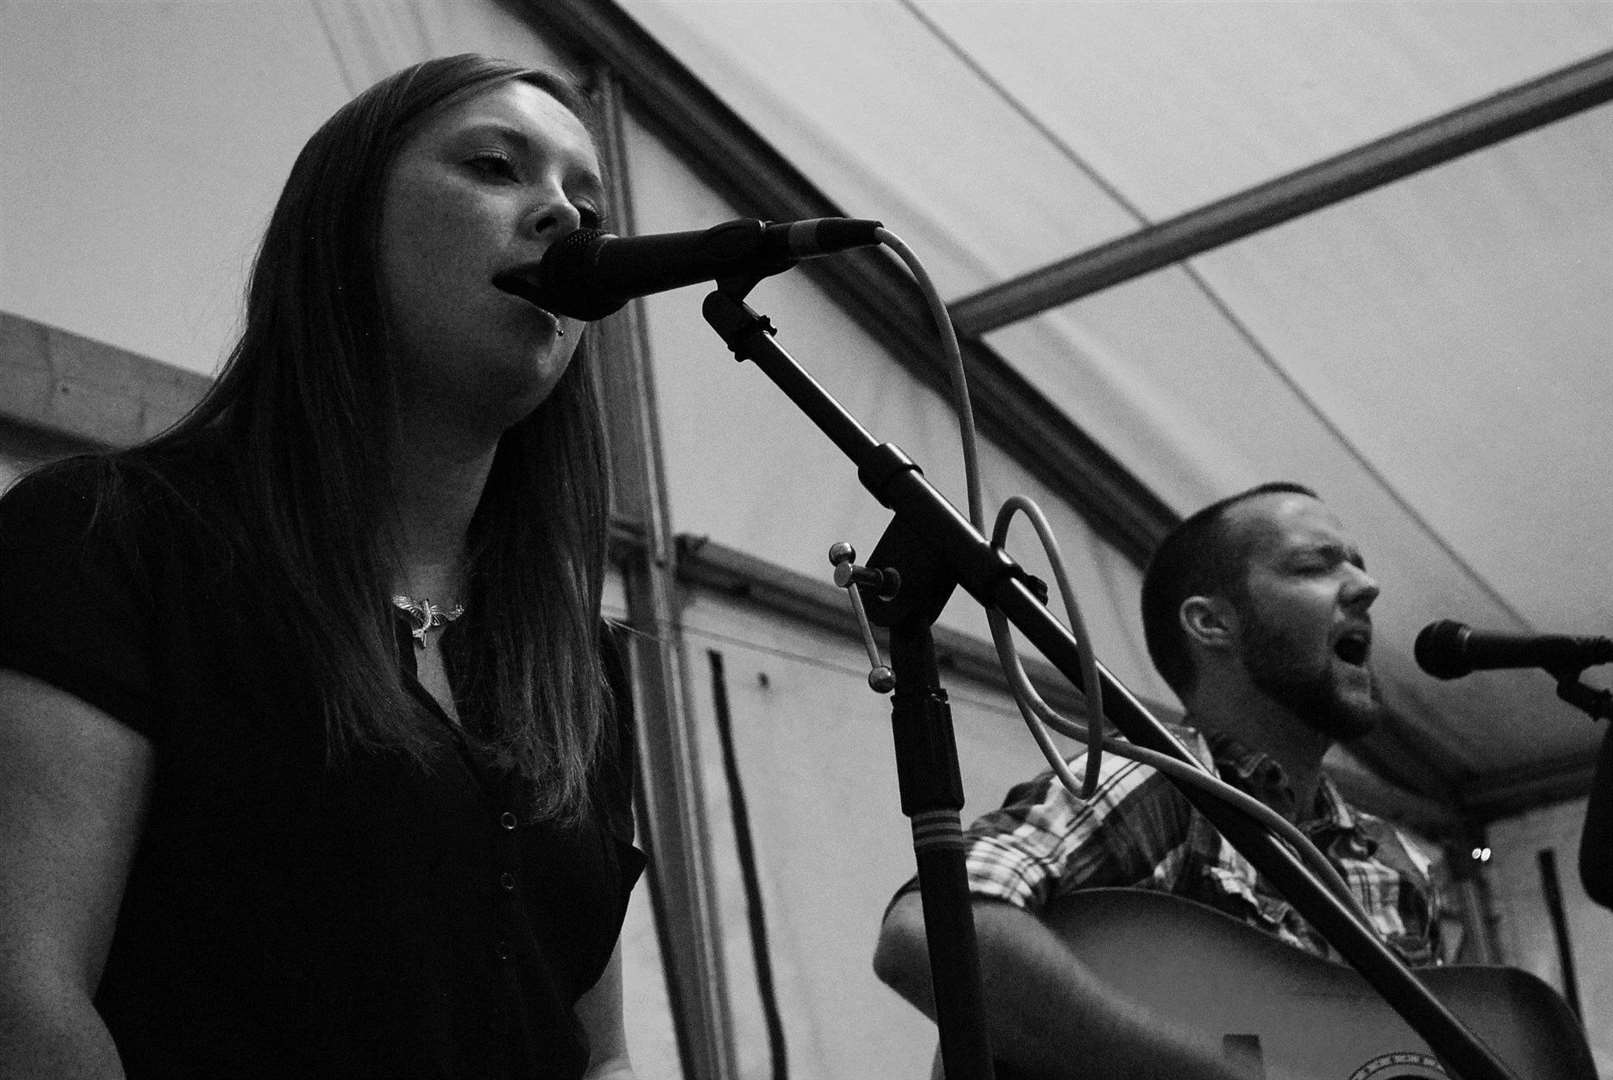 Andy and Abbie Thomas, from Buckie, who make up one half of the band Apples Acoustics.